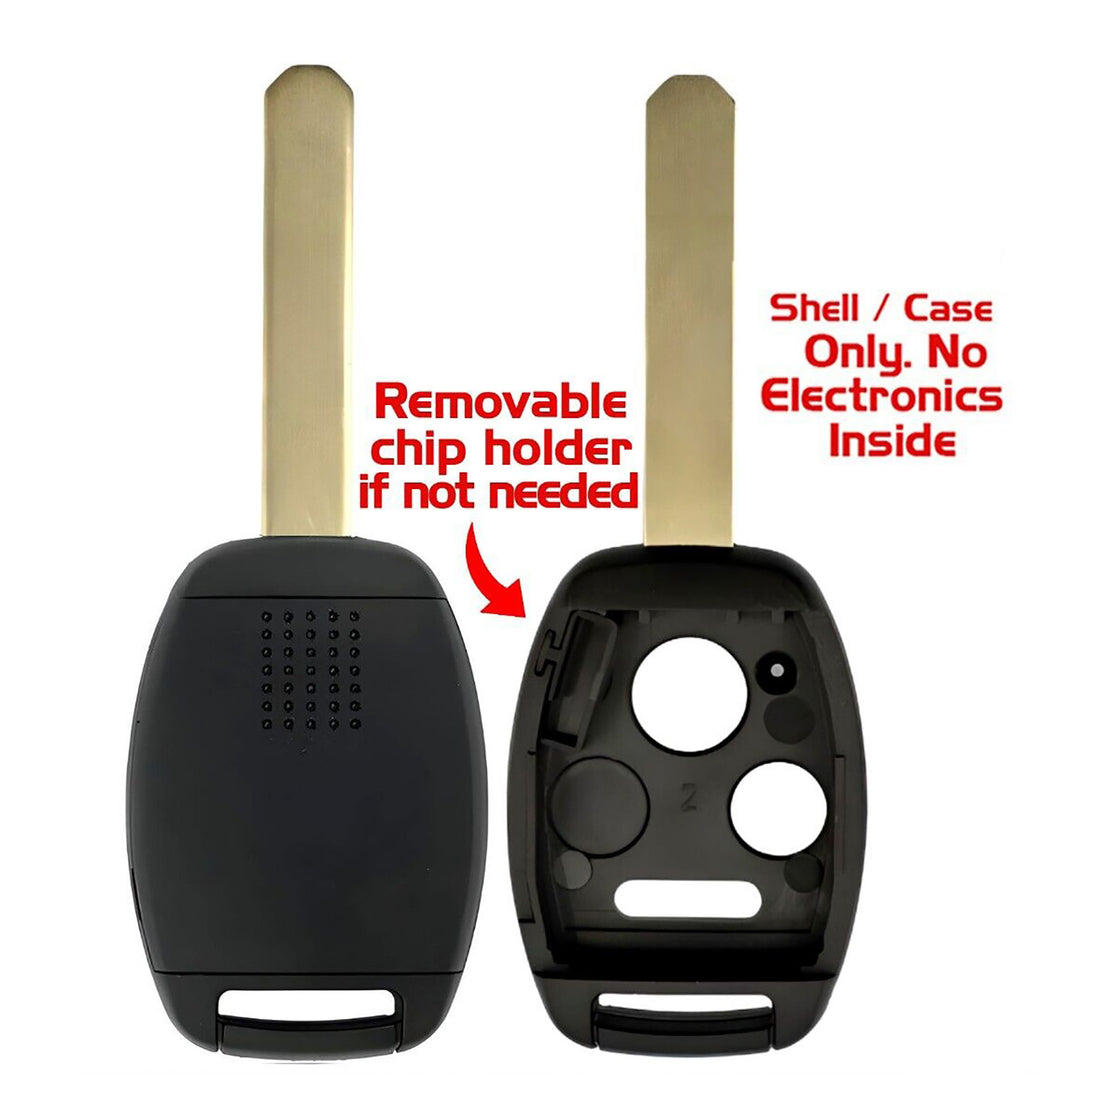 1x New Replacement Key Fob Remote Extremely Strong SHELL / CASE Compatible with & Fit For Honda - MPN N5F-S0084A-S-04 (NO electronics or Chip inside)